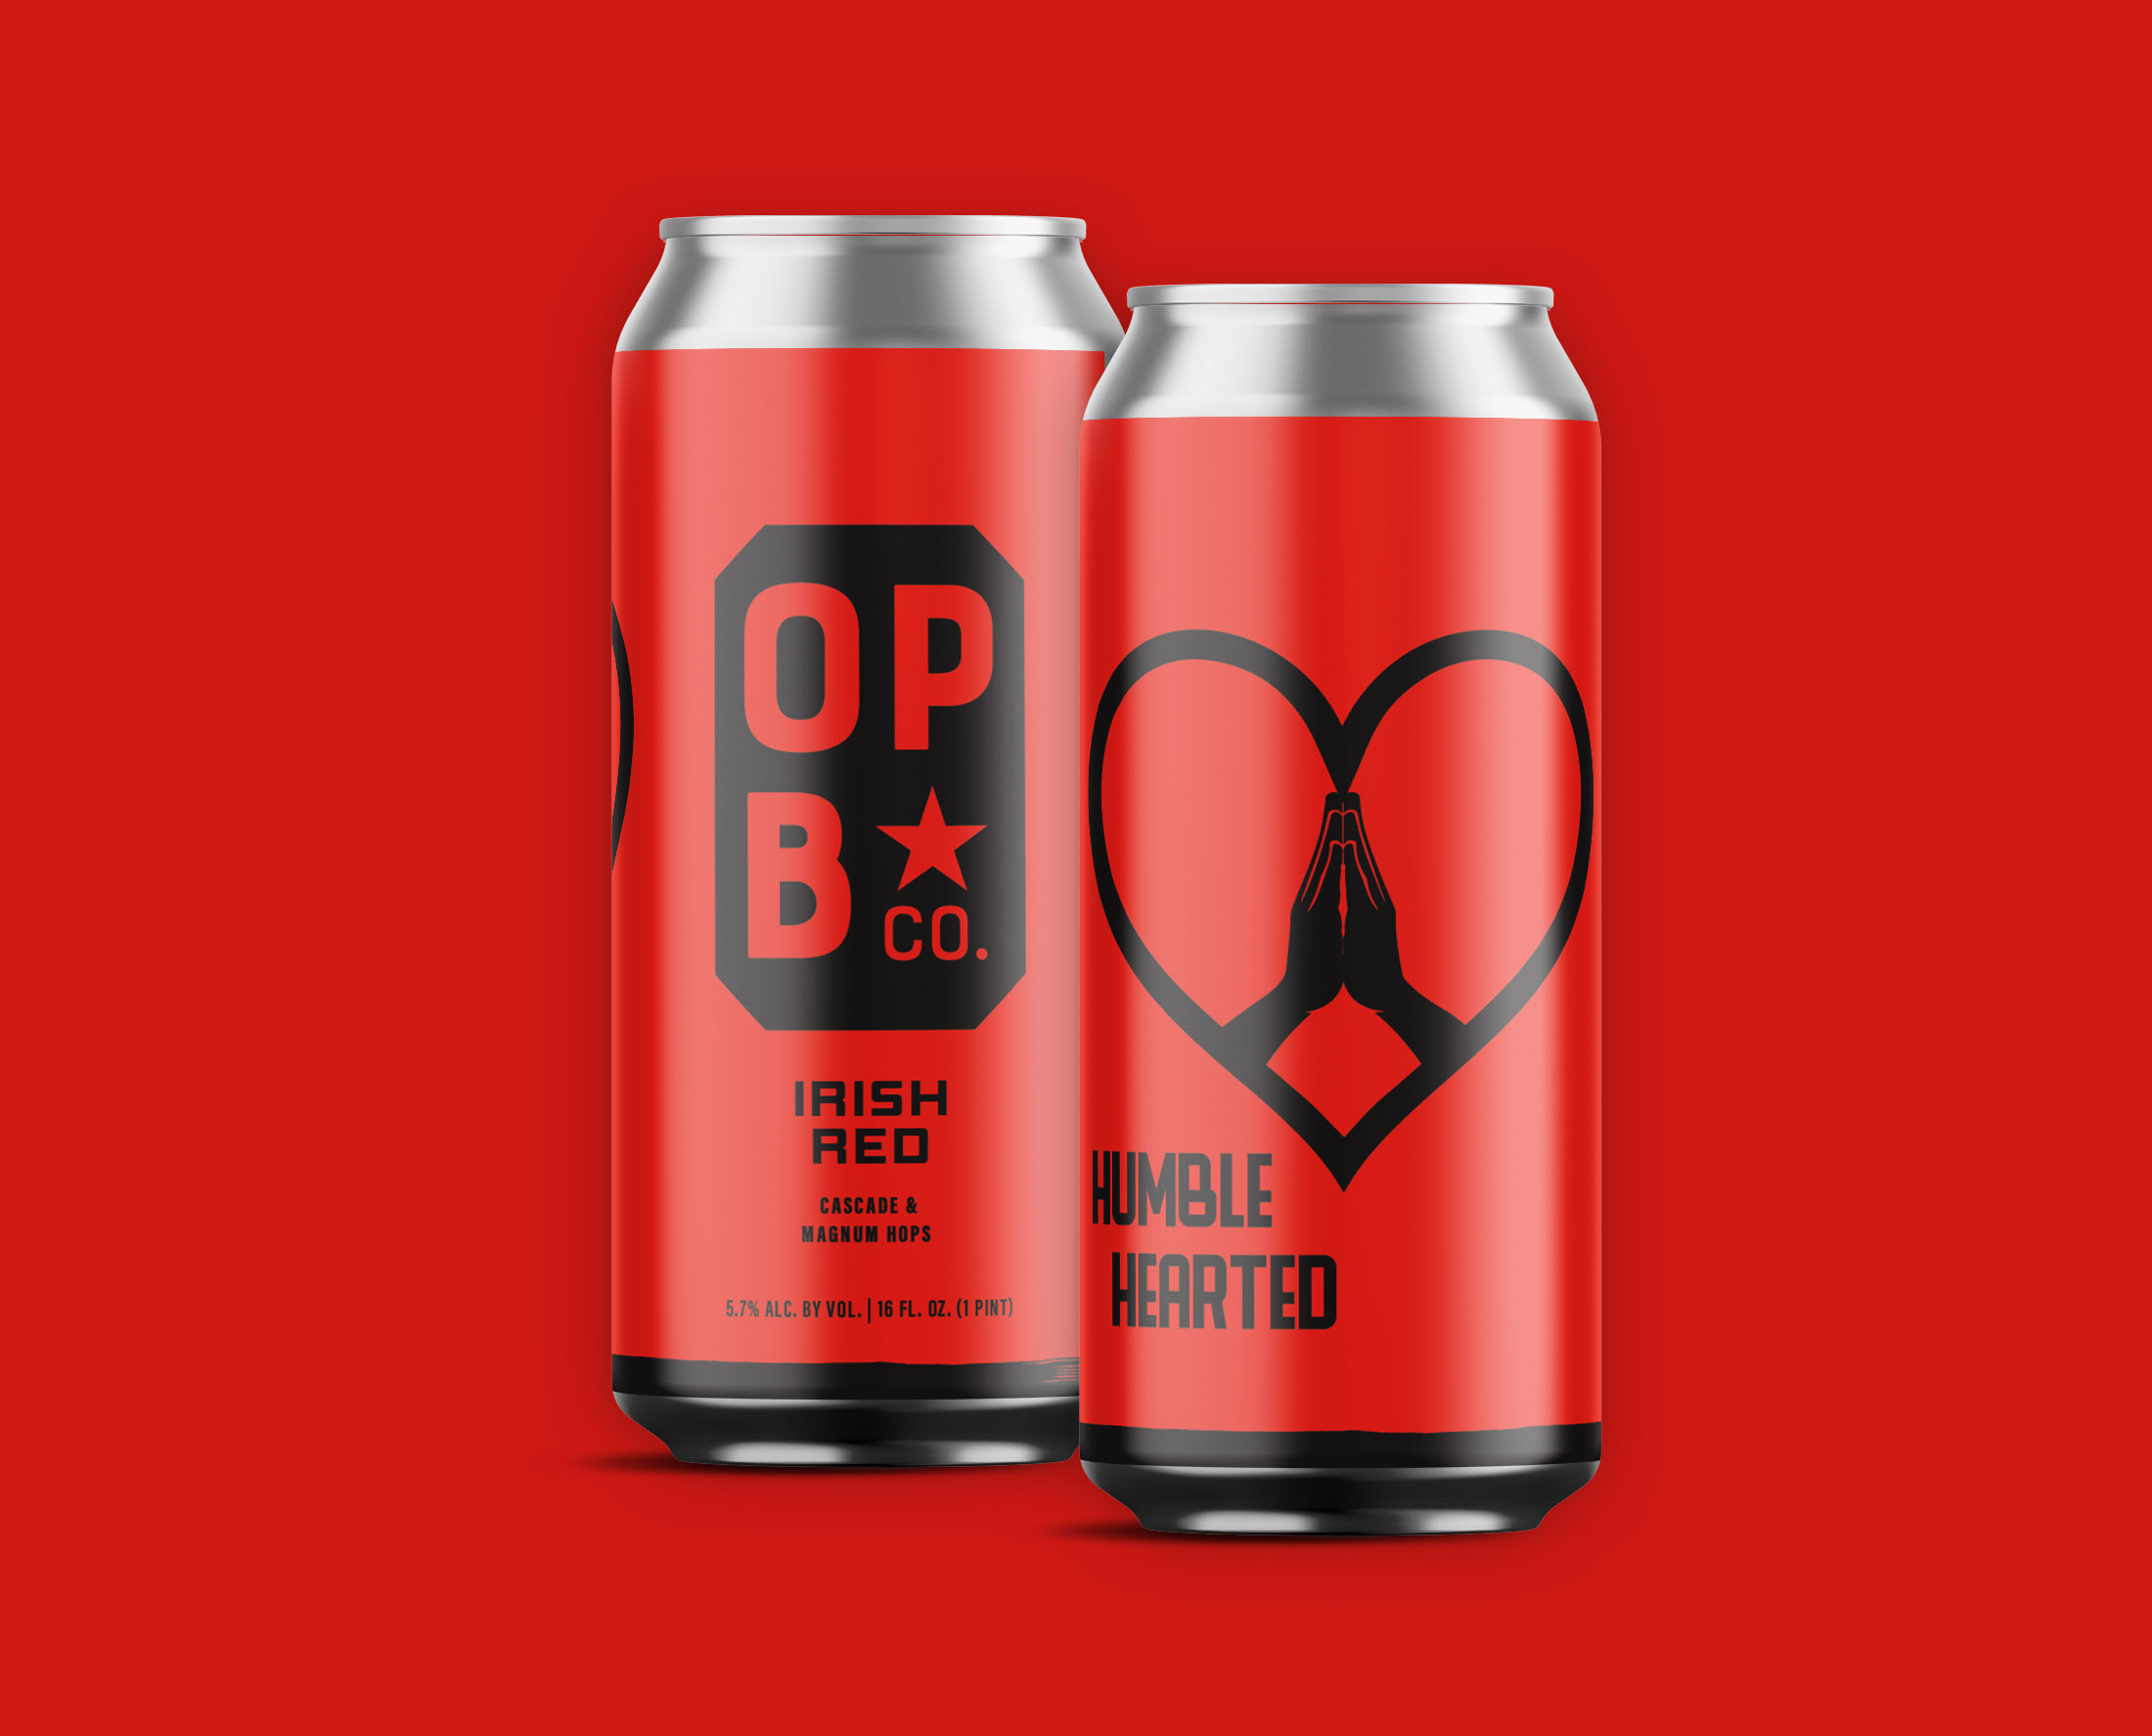 Digital rendering of Humble Hearted beer cans 2 cans